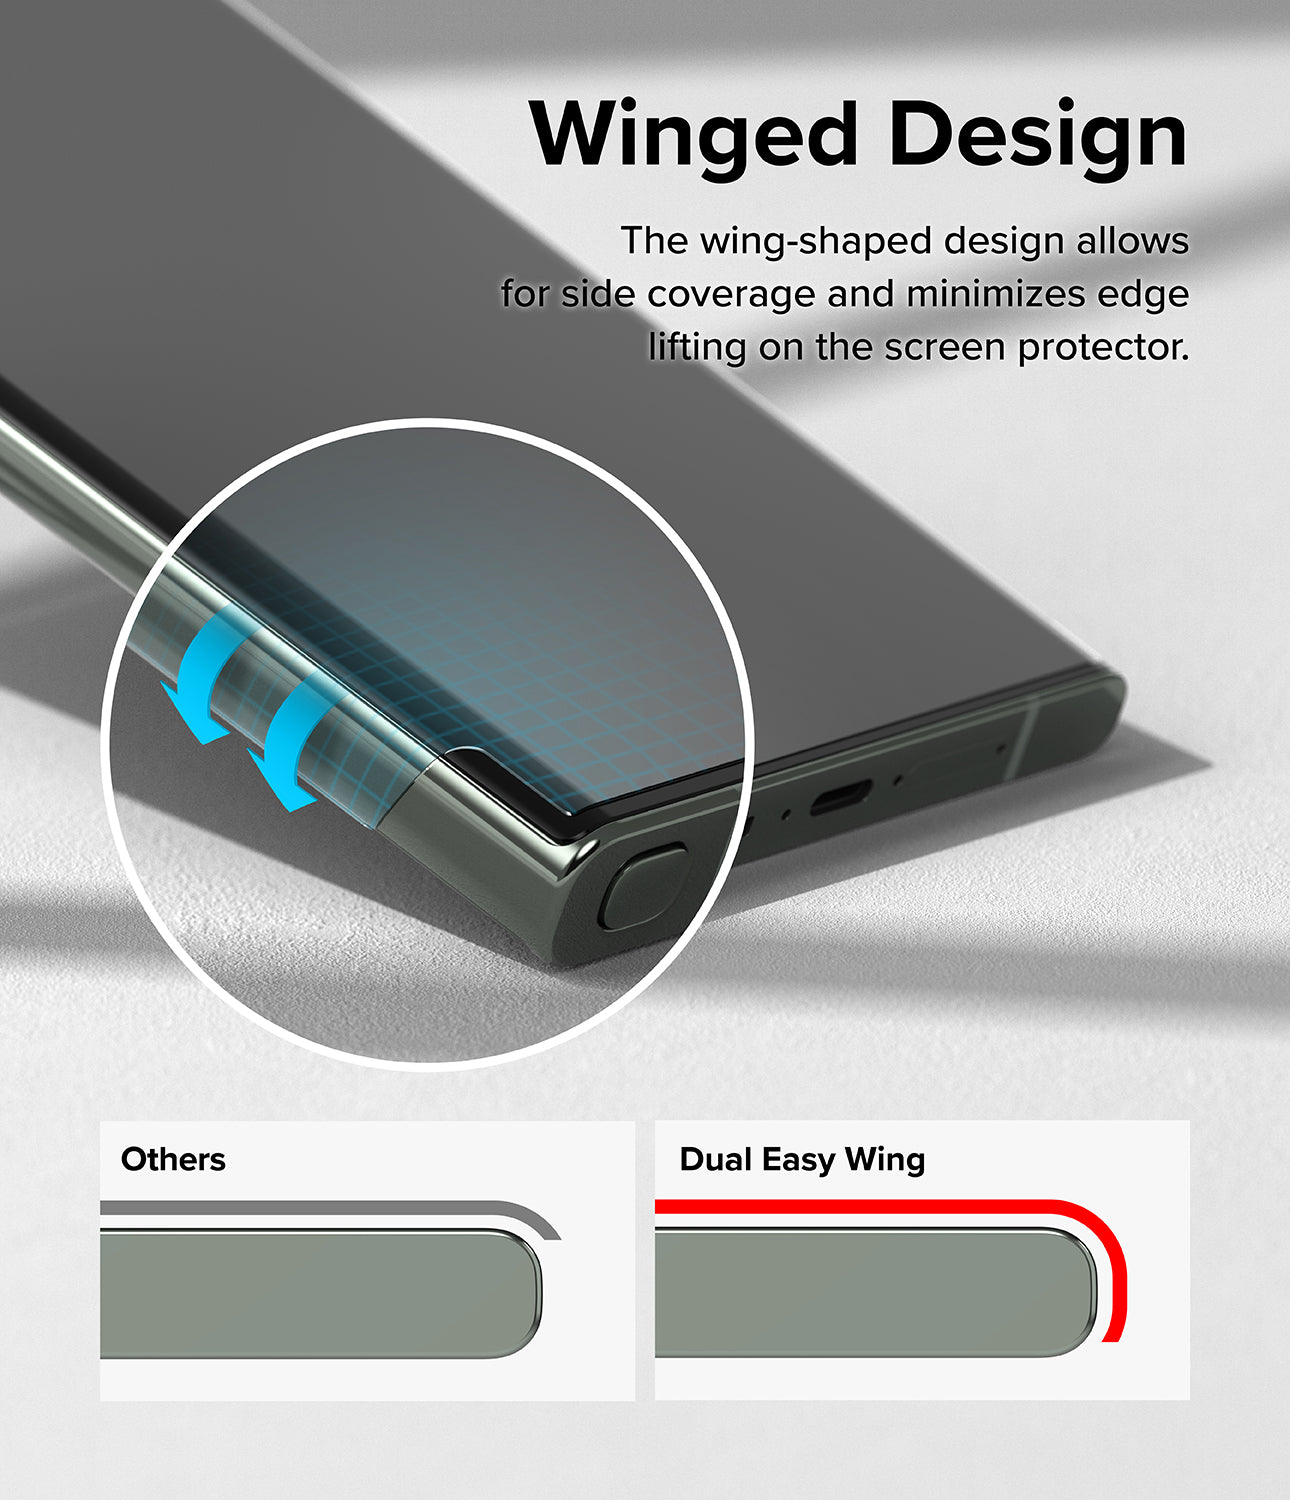 Winged Design l The wing-shaped design allows for side coverage and minimizes edge lifting on the screen protector.